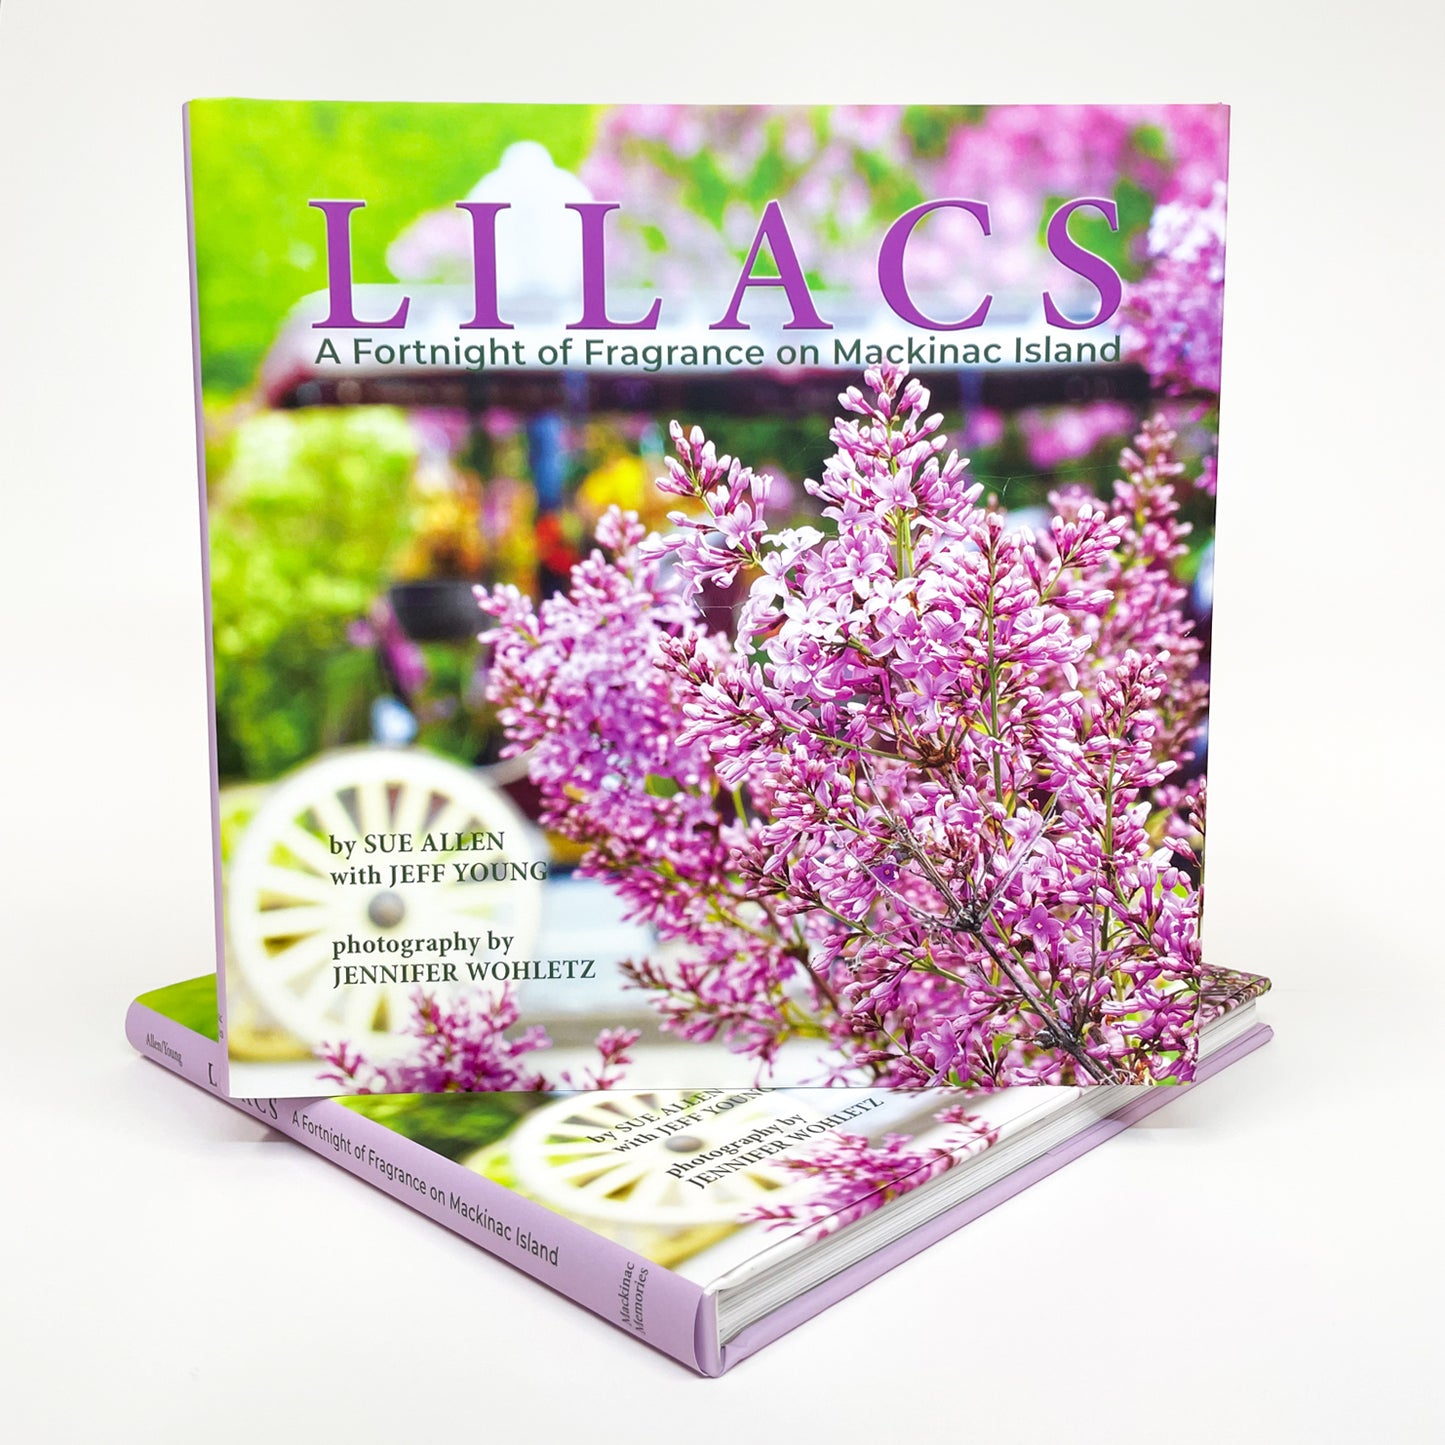 LILACS – A Fortnight of Fragrance on Mackinac Island, takes readers on a photographic tour of the iconic blooms unfolding all over the island, from quaint little lanes to sunny Marquette Park to a huge hedge at British Landing. 